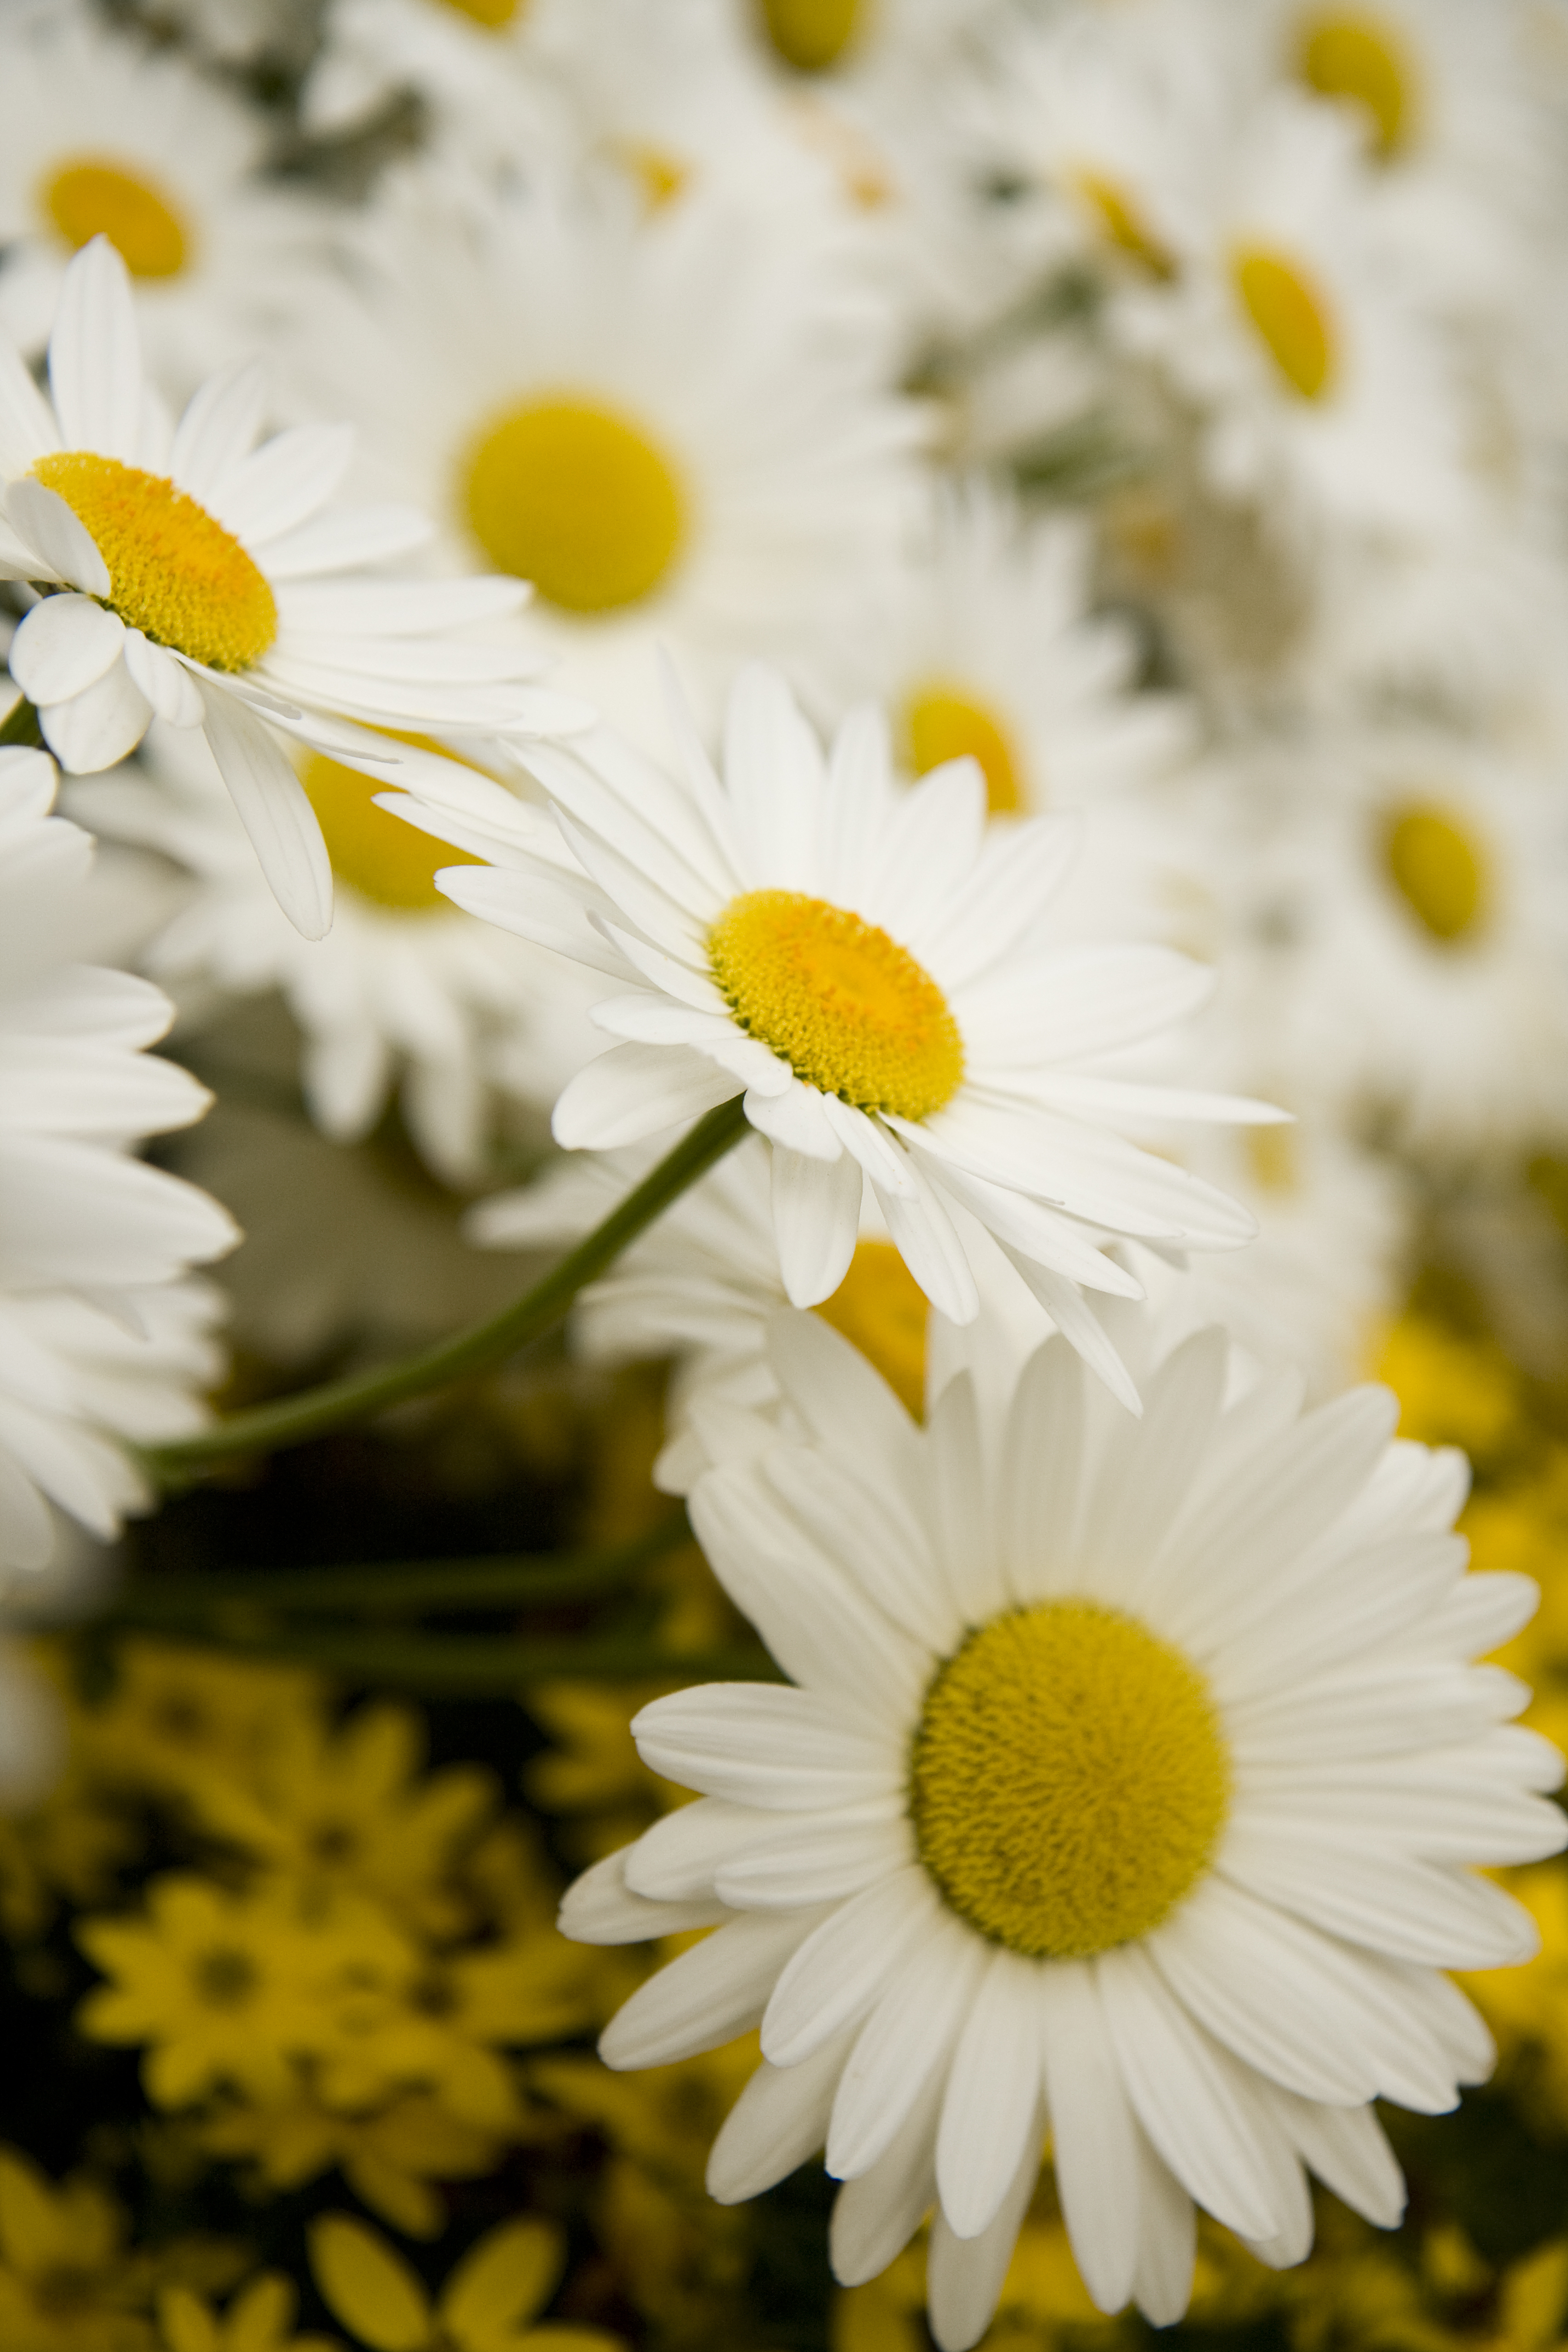 Things You Didn't Know About Daisies - Daisy Fun Facts